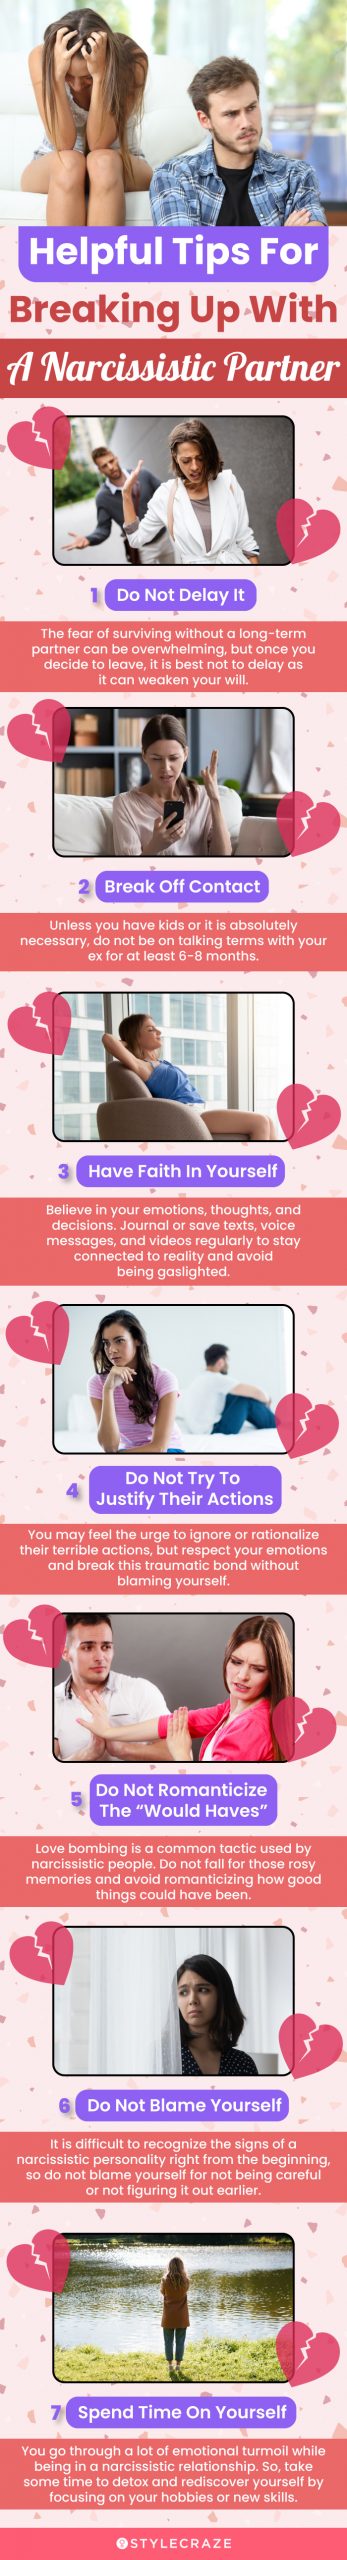 helpful tips for breaking up with a narcissistic partner (infographic)